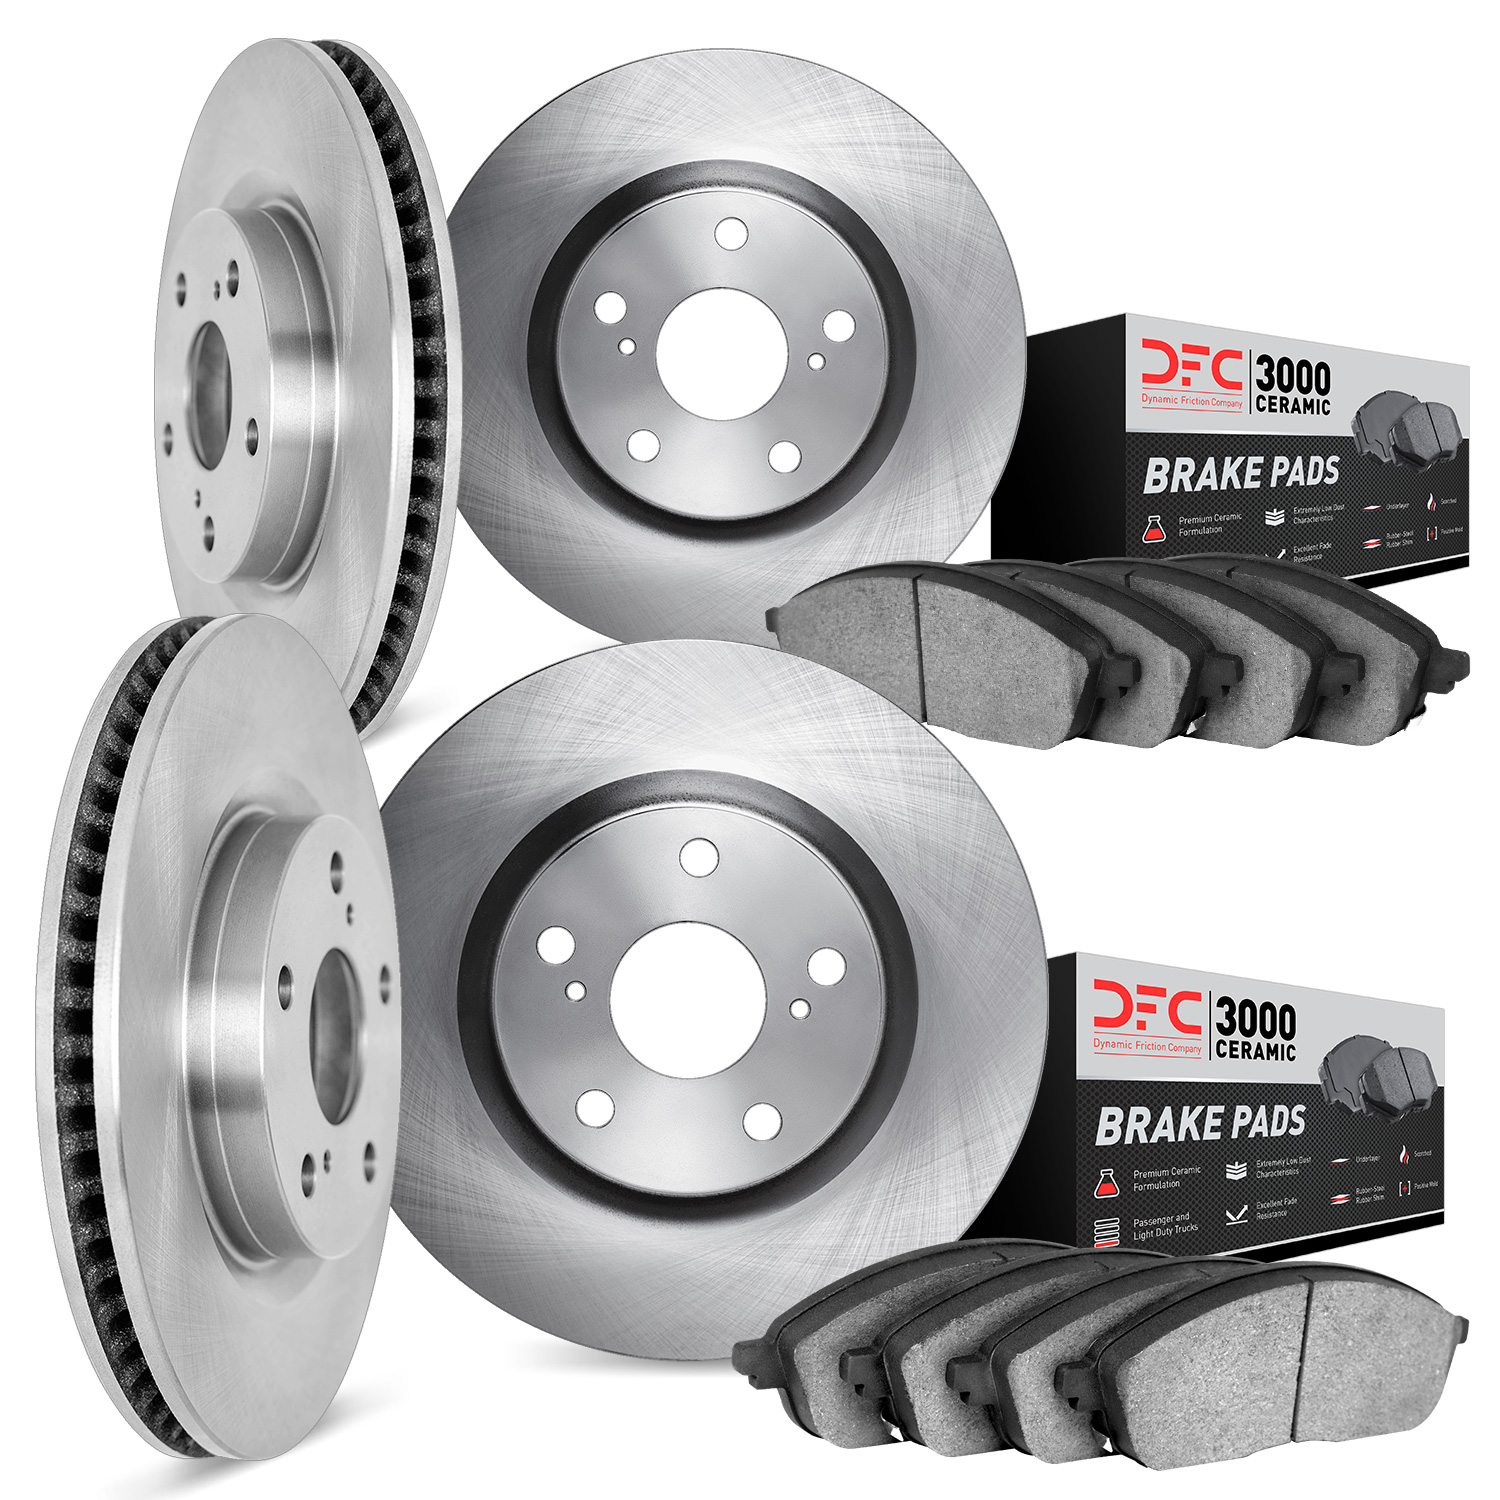 6304-75013 Brake Rotors with 3000-Series Ceramic Brake Pads Kit, 2006-2013 Lexus/Toyota/Scion, Position: Front and Rear